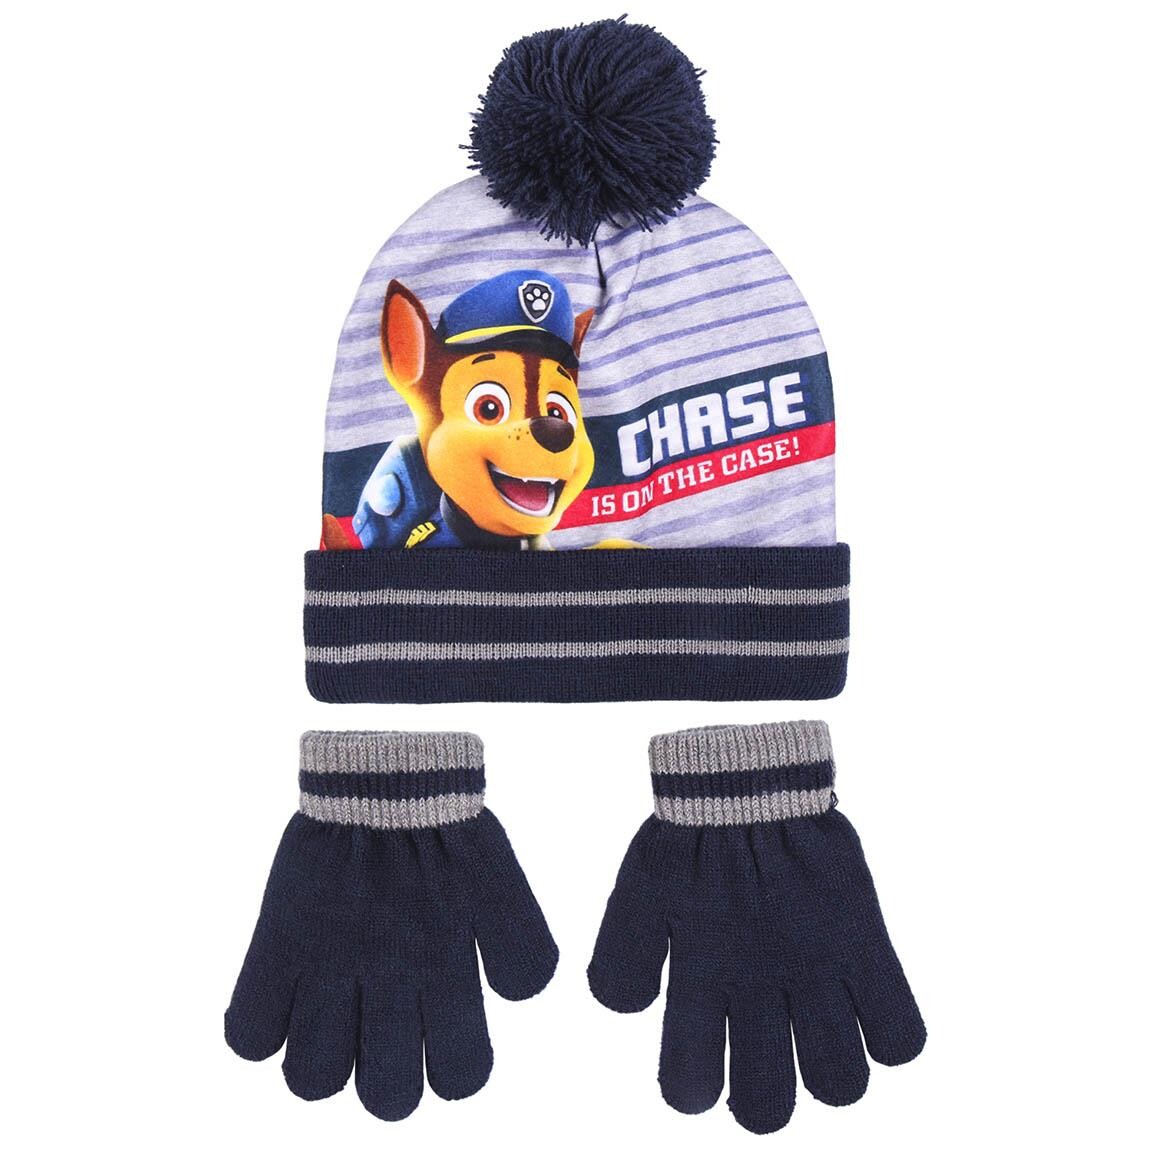 Winter set Paw Patrol | and accessories for merchandise fans